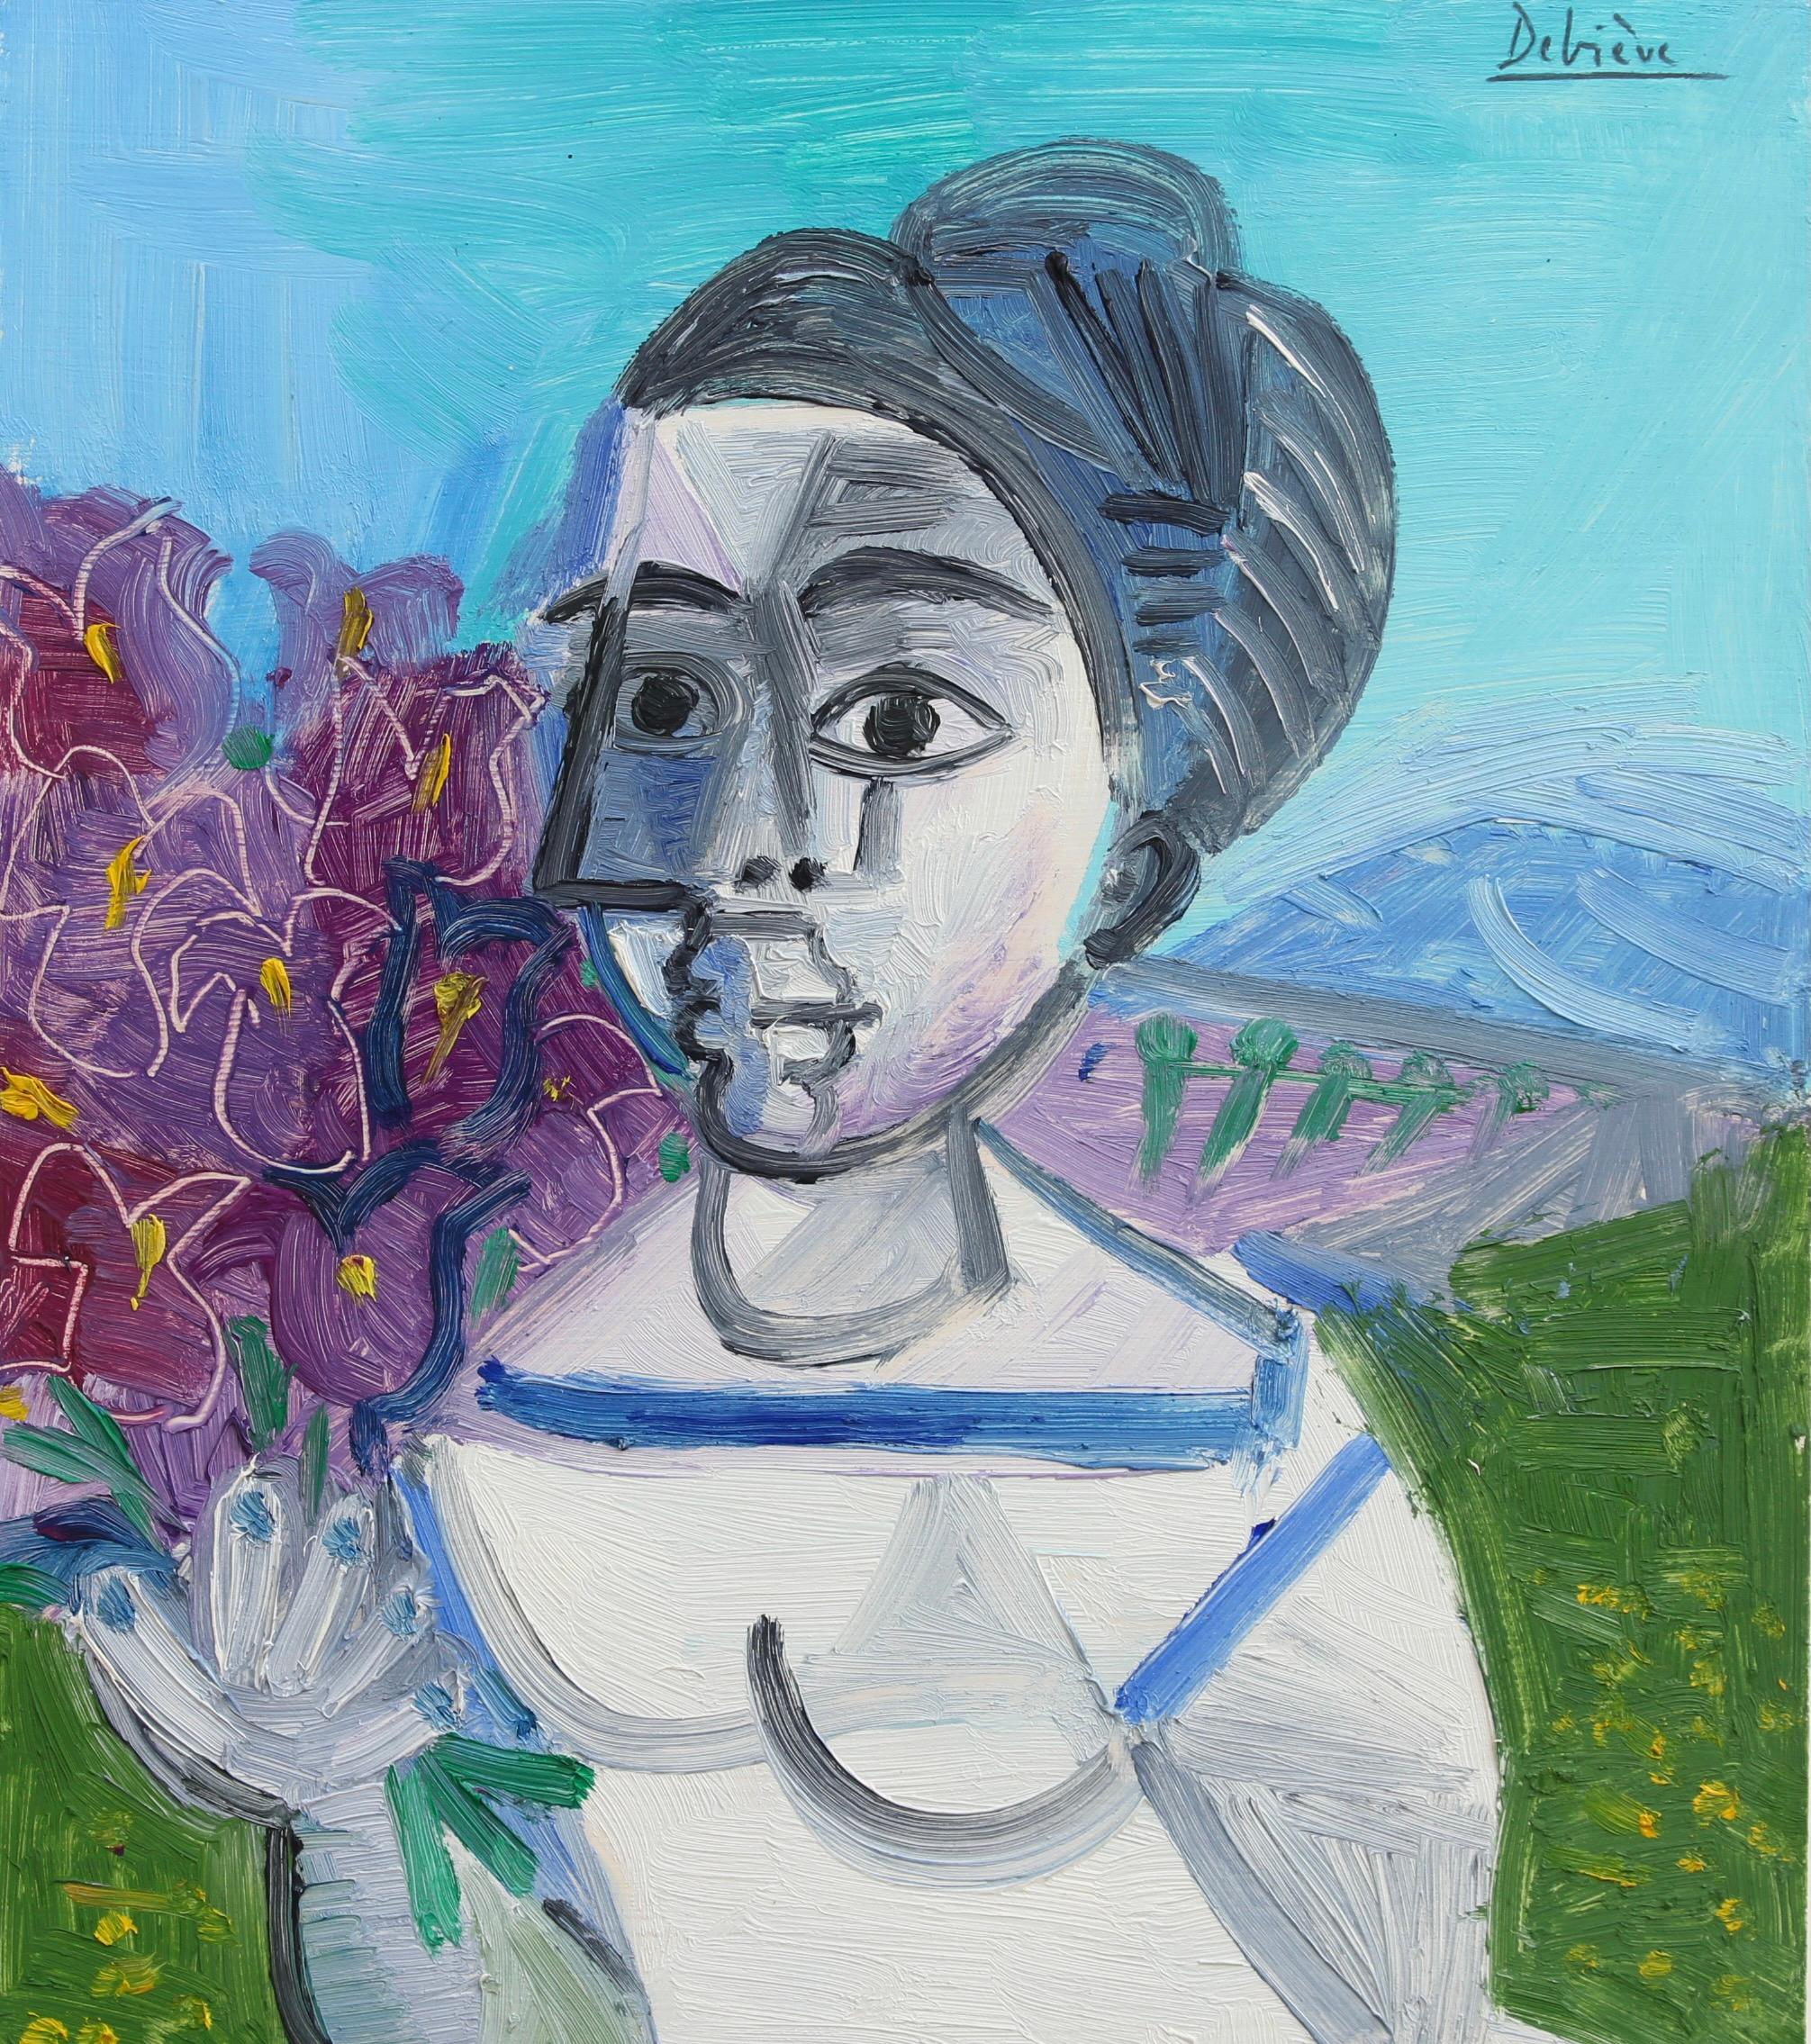 'Portrait of Woman with Irises', oil on cardstock paper (1976), by Raymond Debiève. Here the artist paints a young woman holding a bunch of enchanting iris flowers in his post-cubist style. Behind her is a green, hilly field and further mounts in